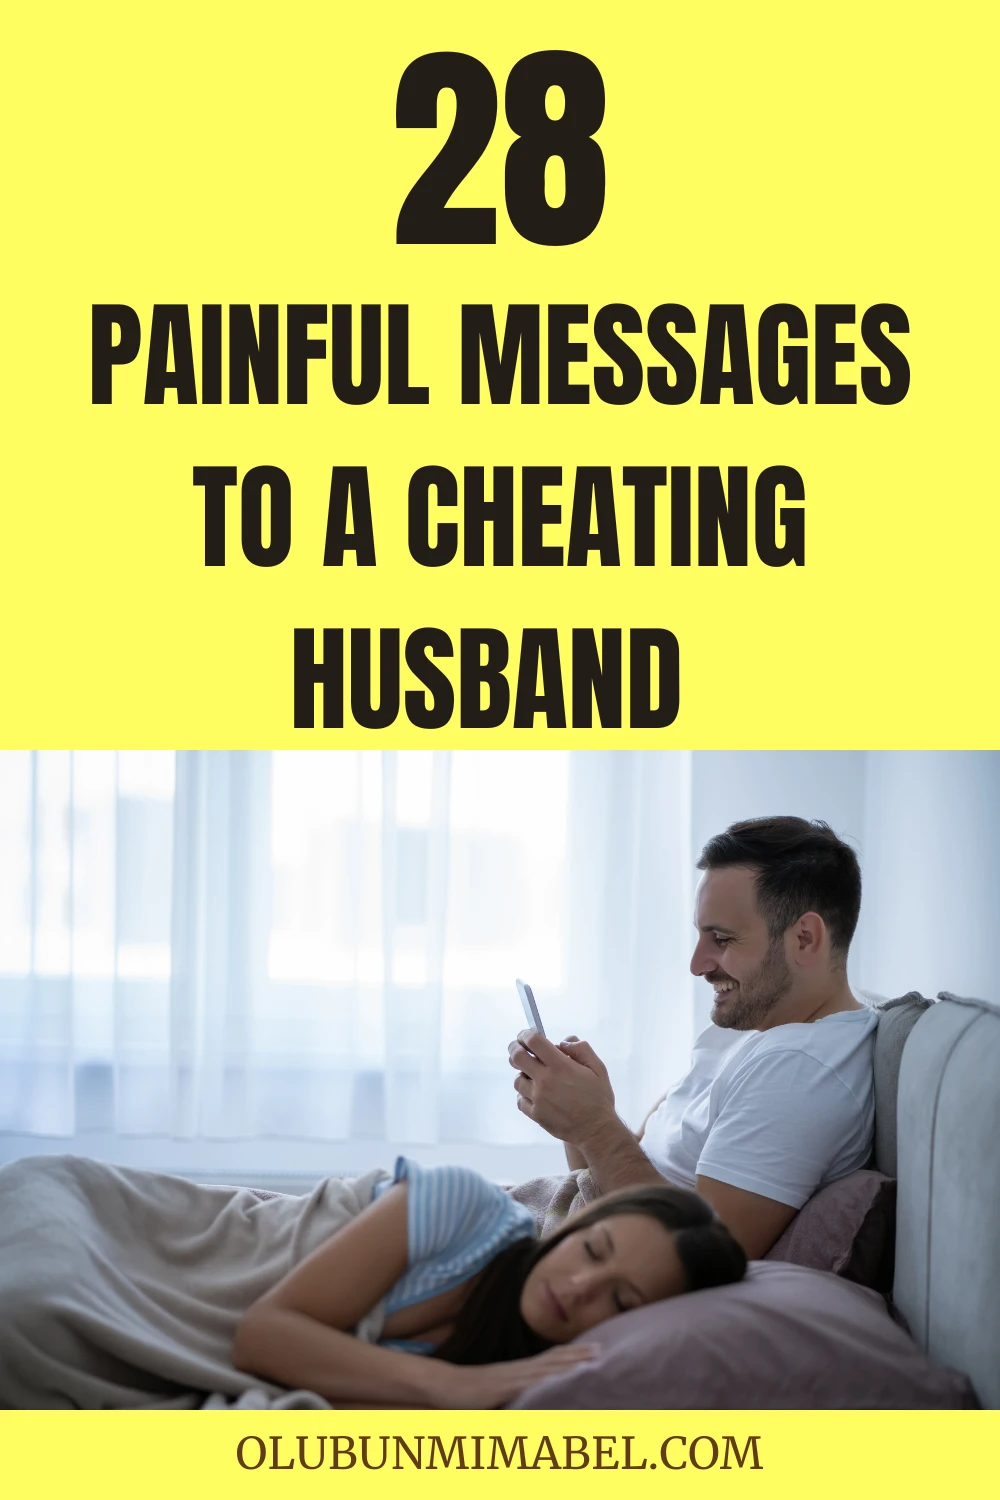 Painful Messages To a Cheating Husband